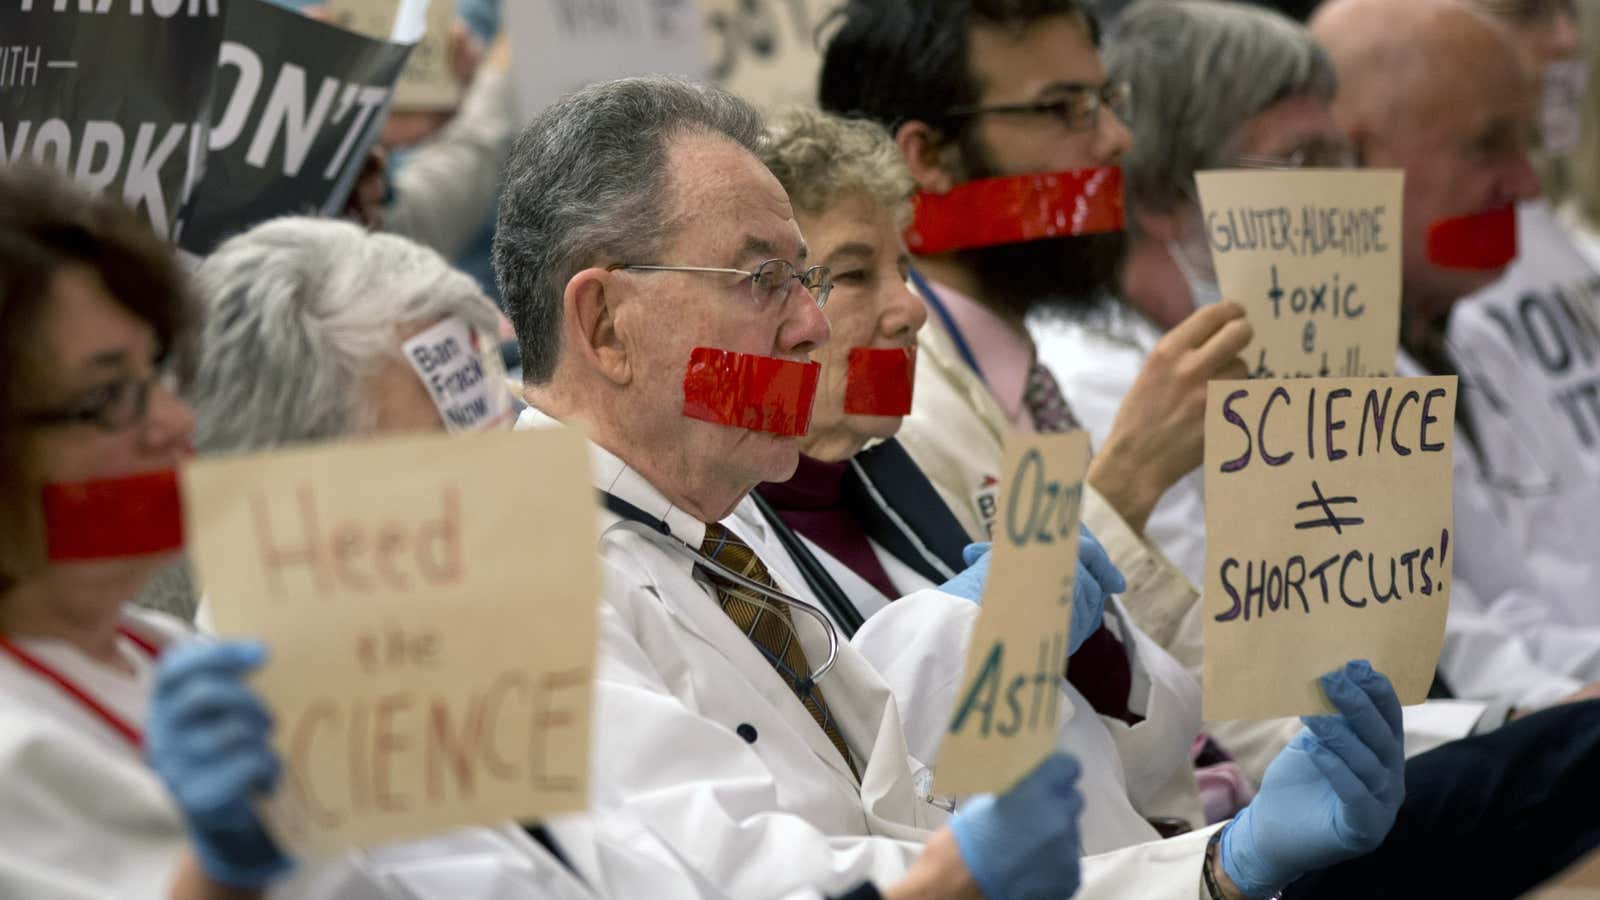 Many doctors are uneasy about all the forced secrecy around fracking.